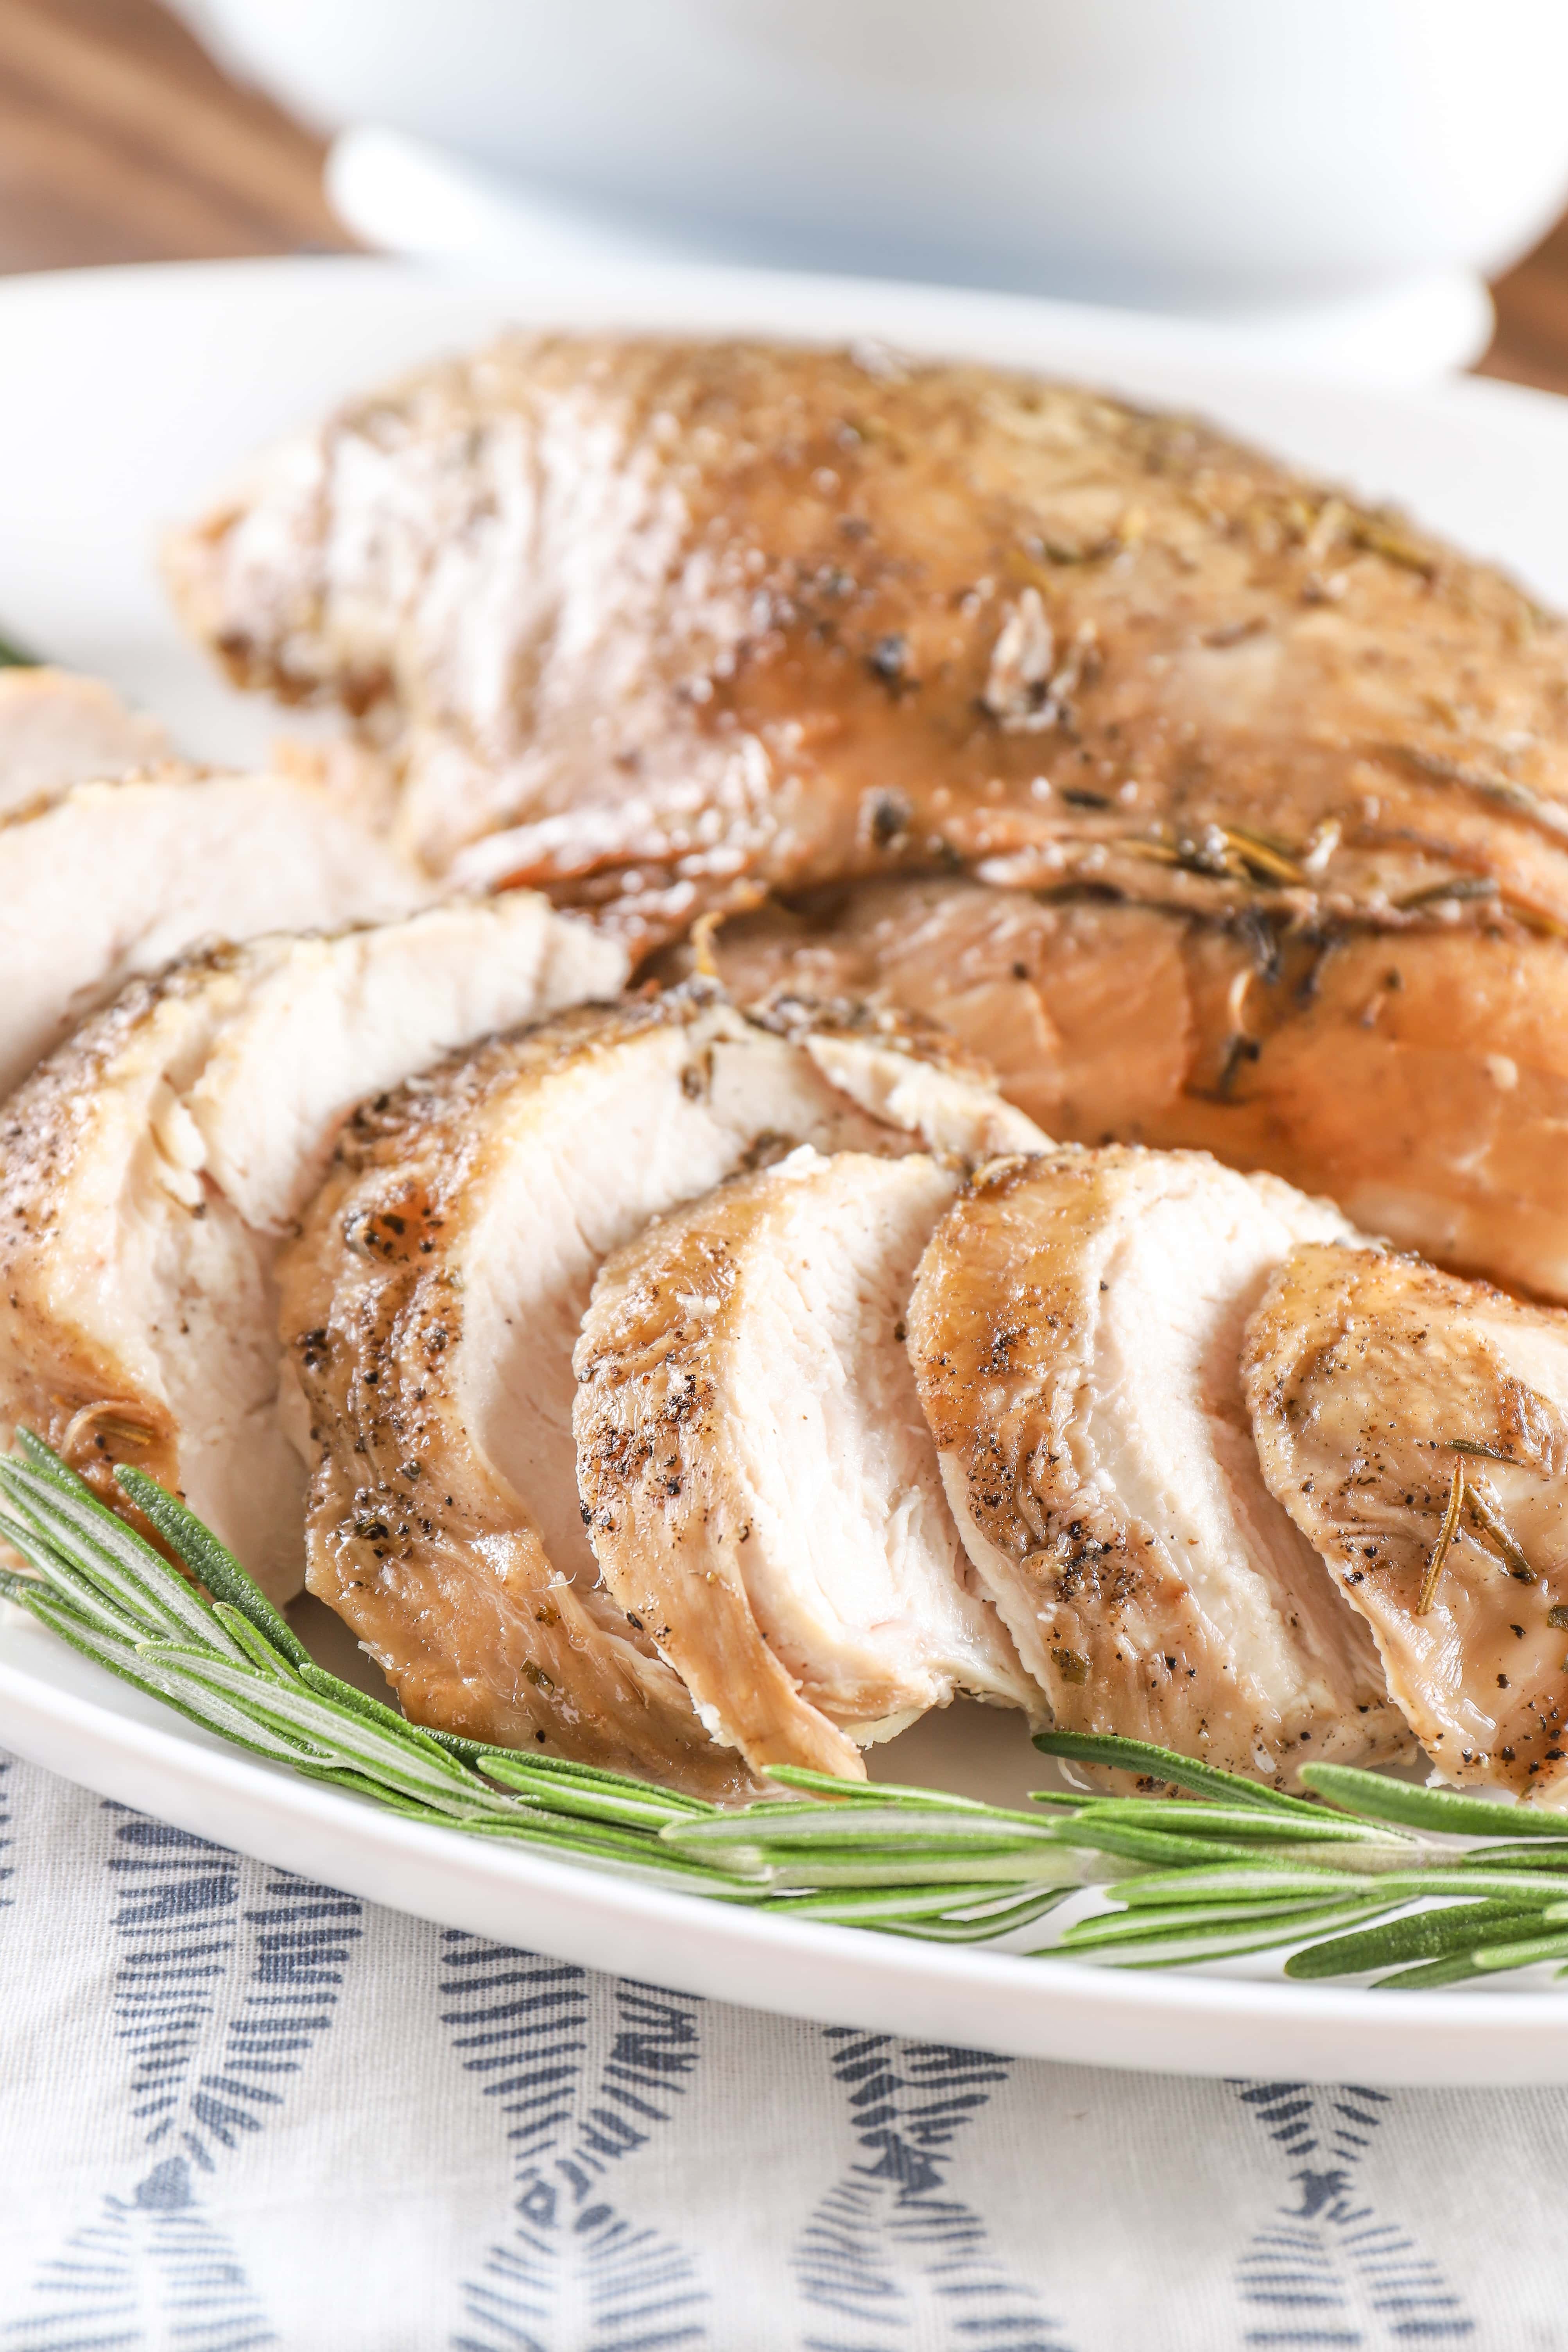 Cider-Brined Smoked Turkey Breast Meal for 4, Commack